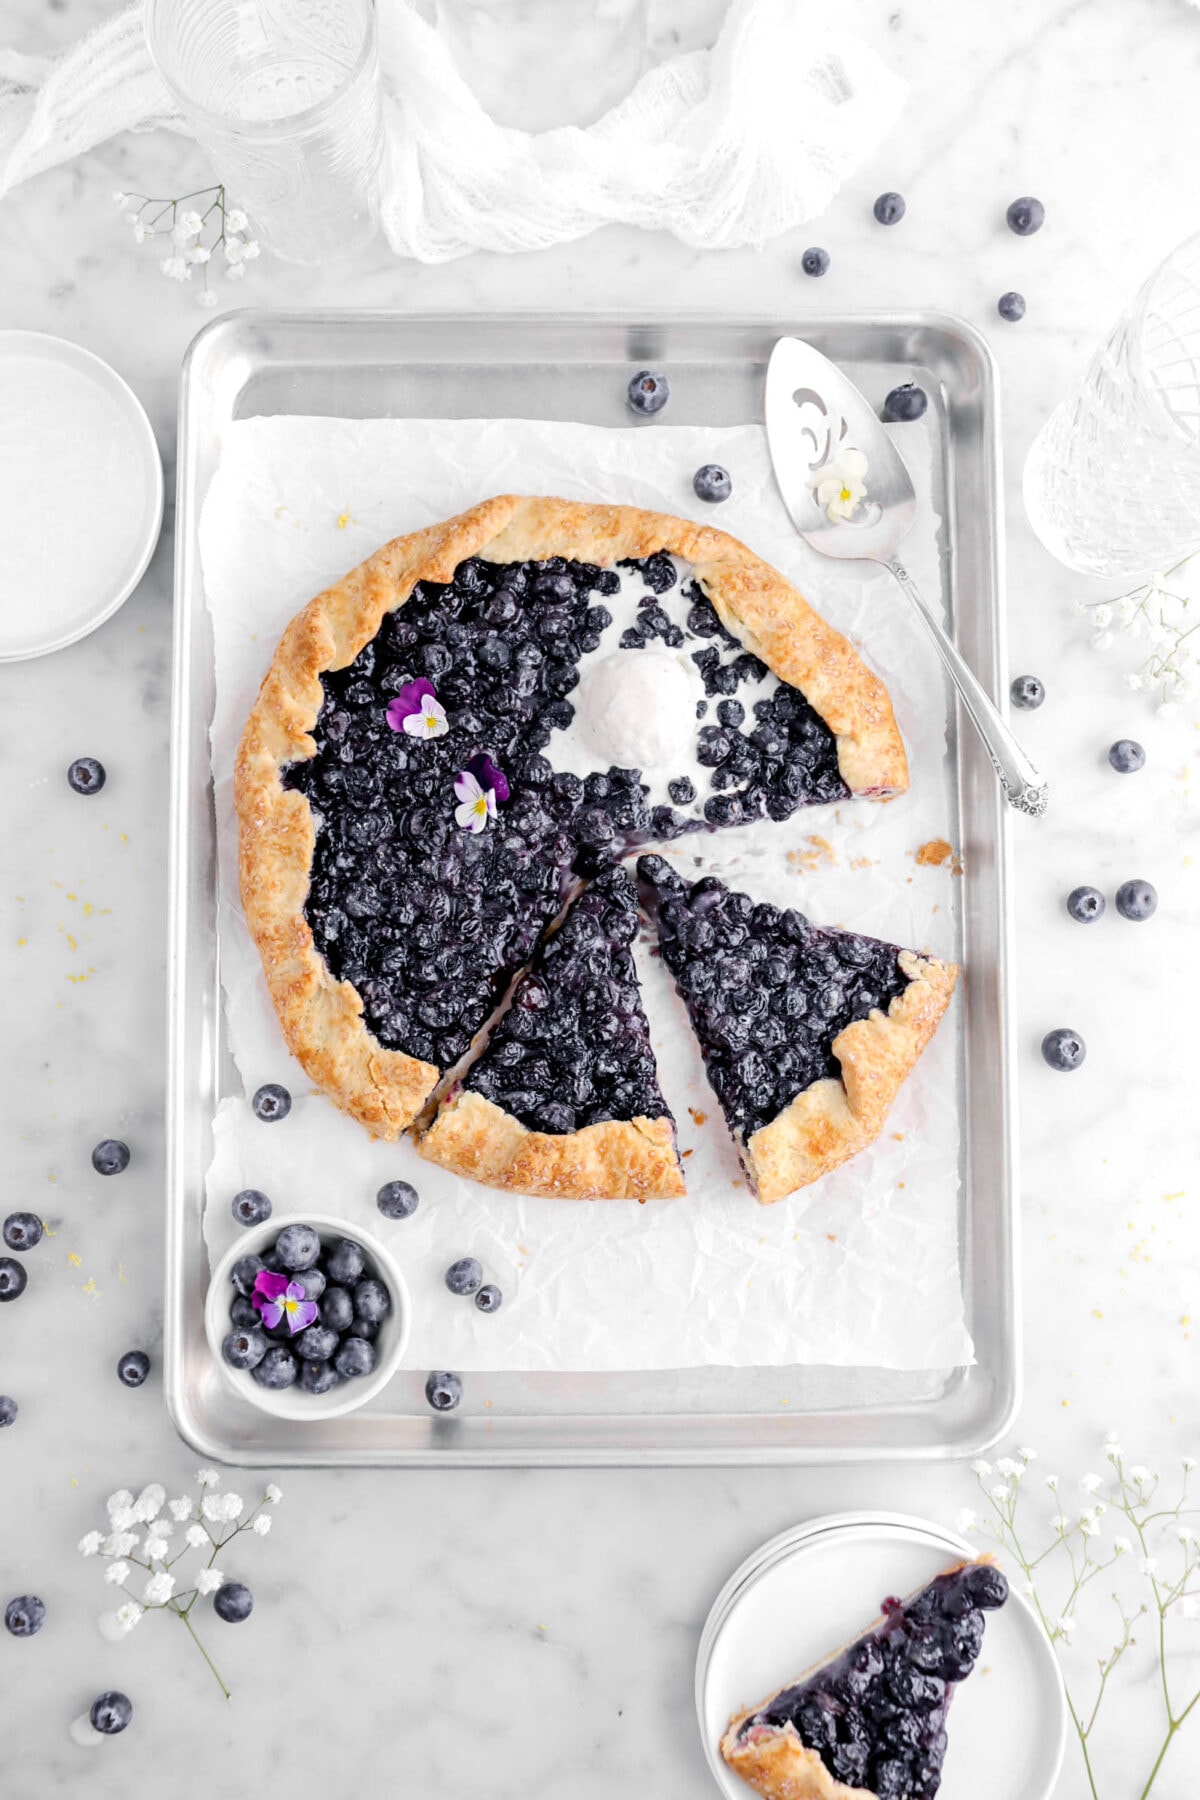 cut blueberry galette on lined sheet pan with scoop of melting vanilla ice cream and two purple and white violas on top, with a slice of galette on stack of plates beside, with fresh blueberries, white flowers, and a cake knife around galette.